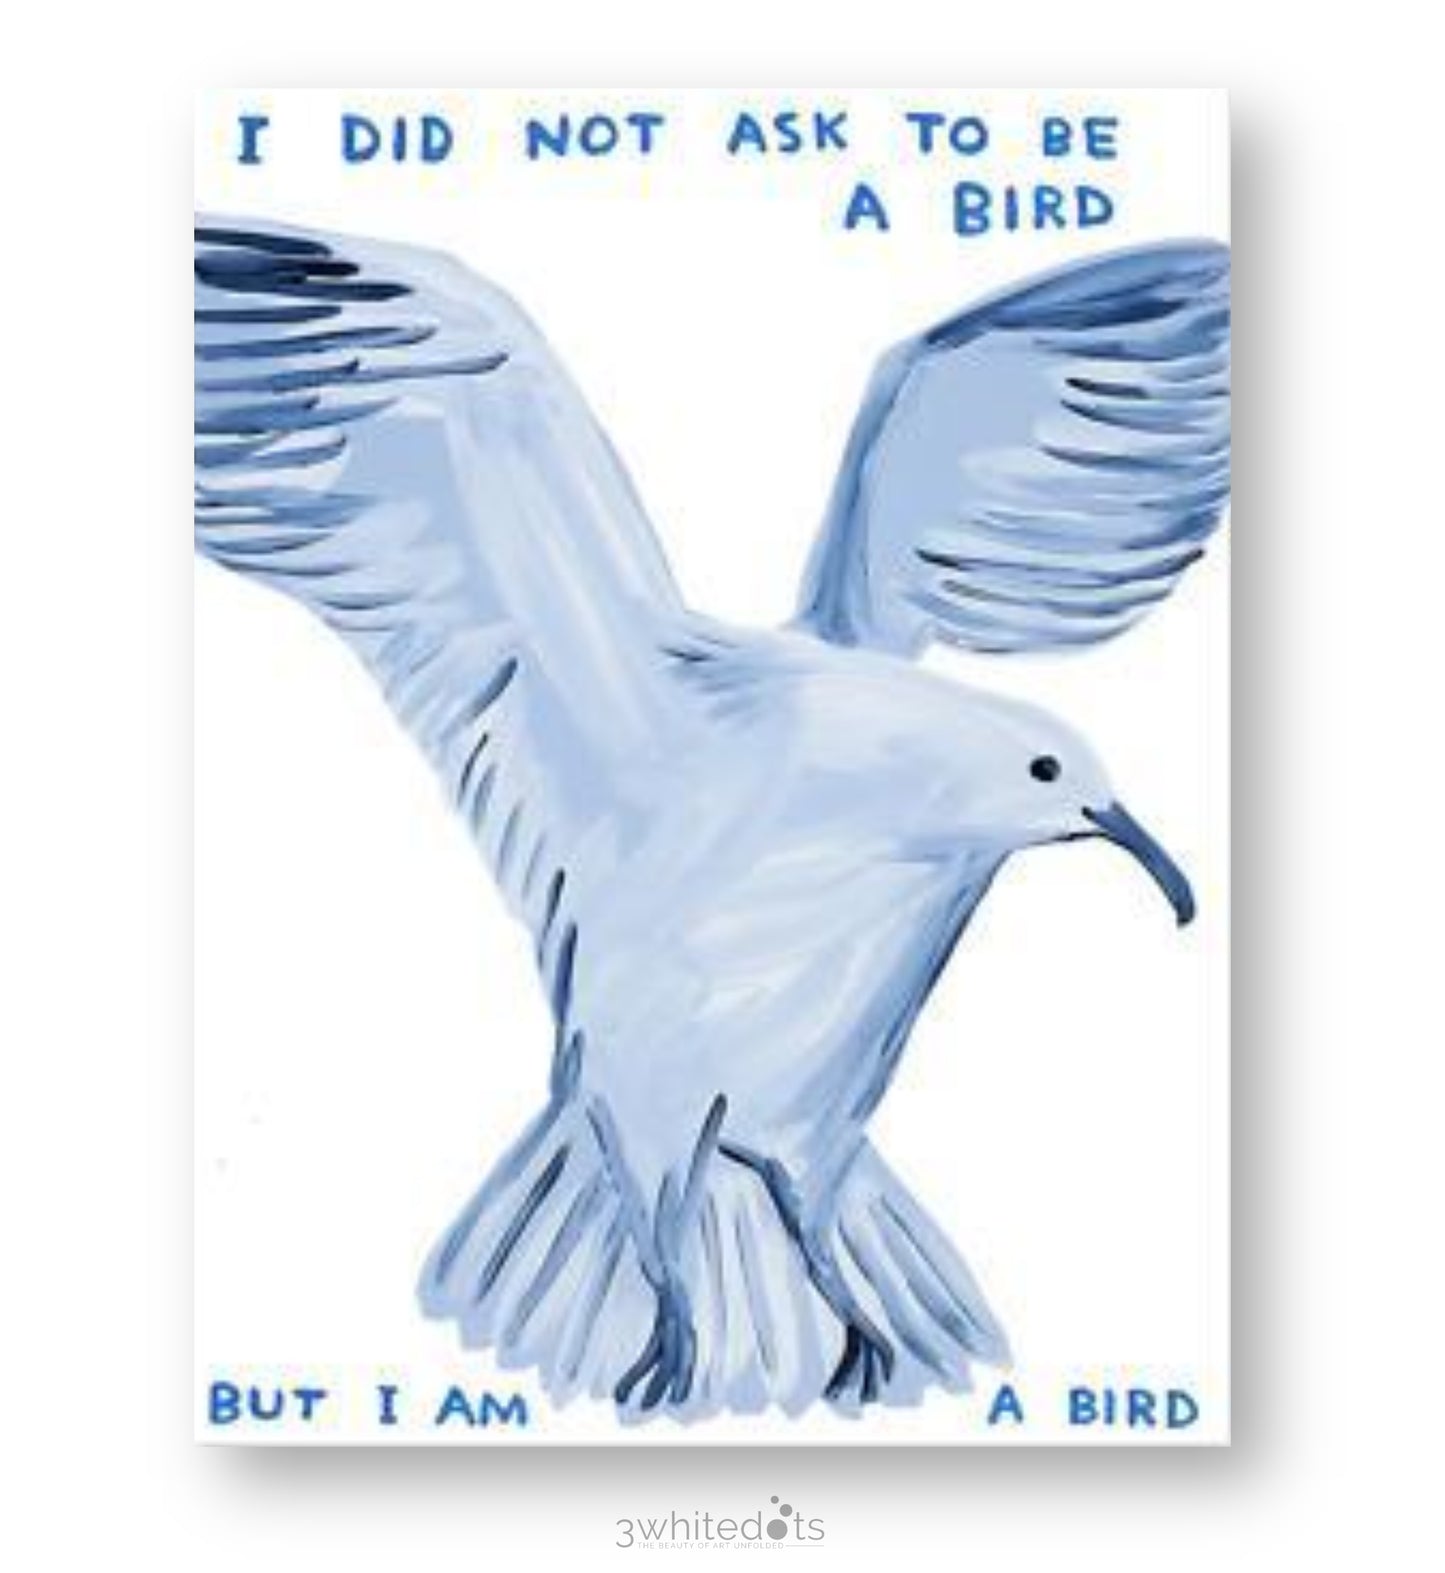 David Shrigley - I Did Not Ask To Be A Bird